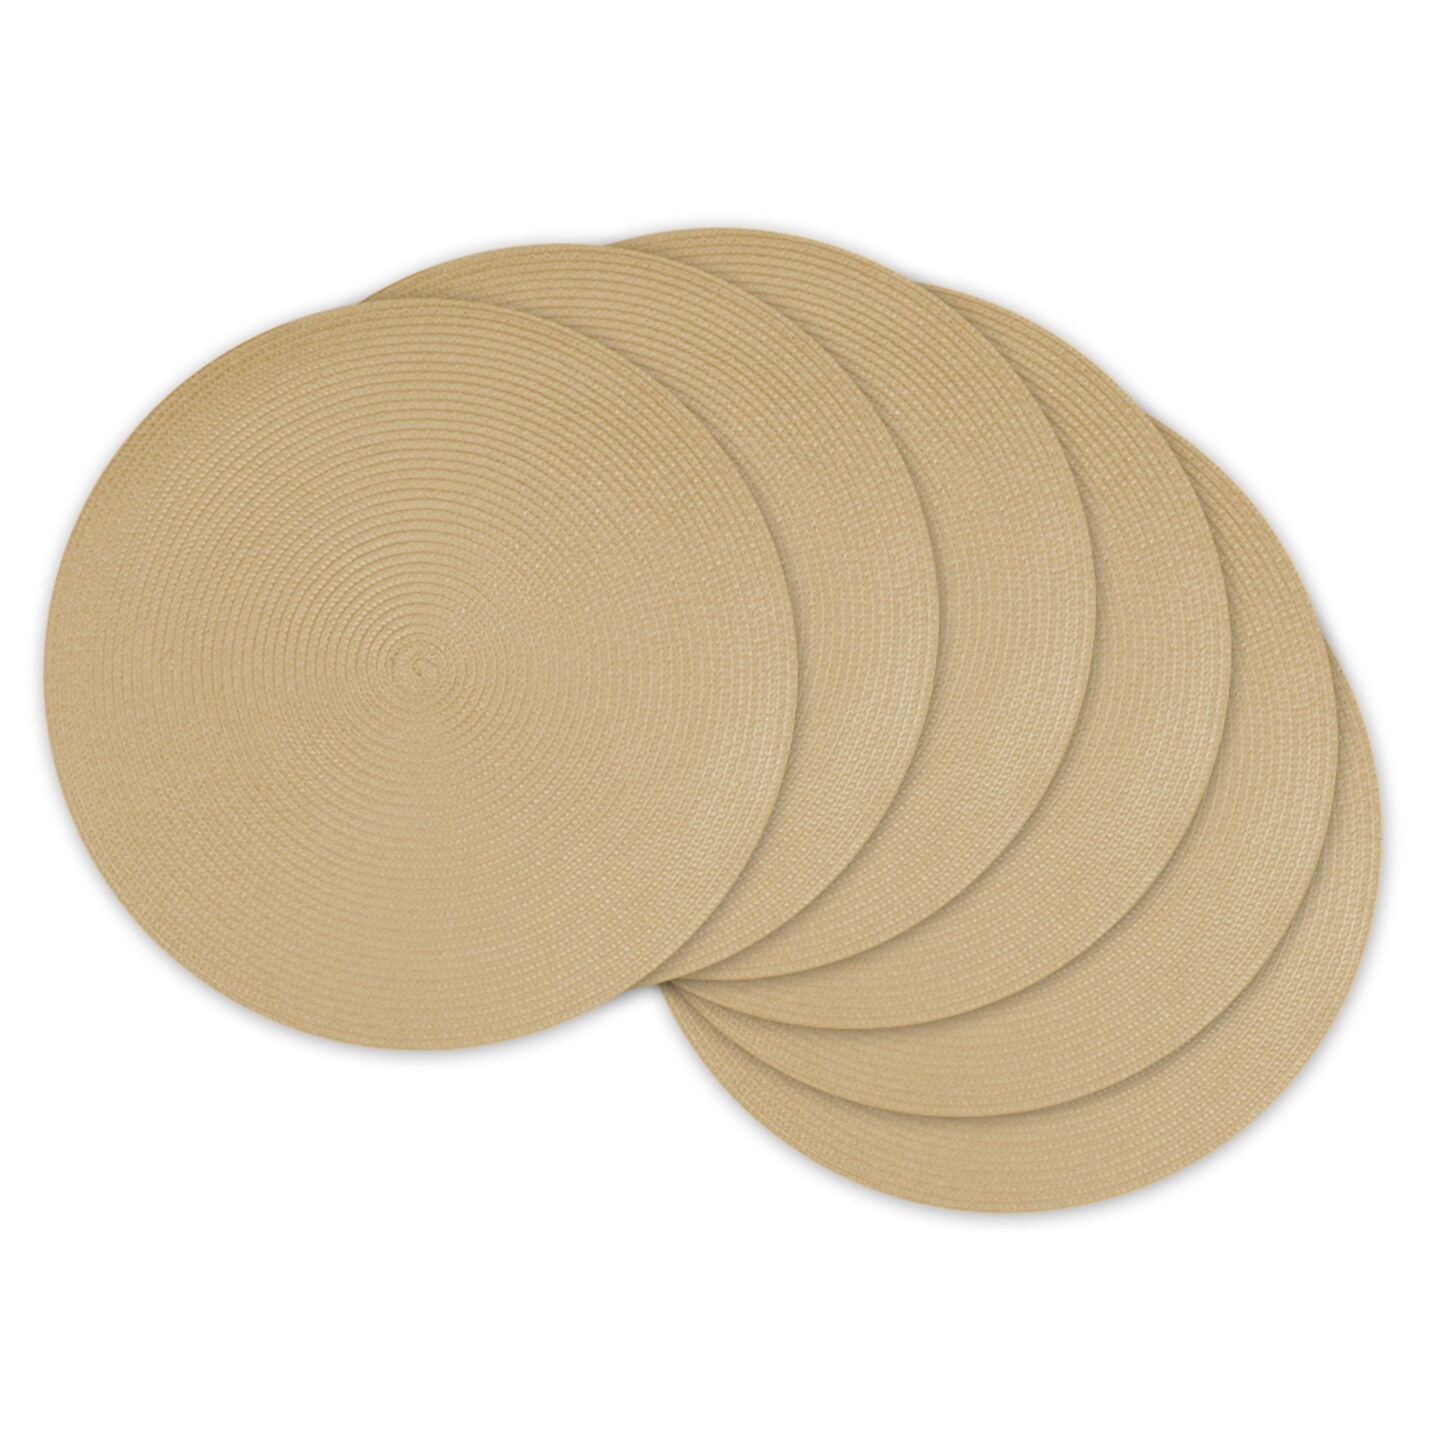 PLACEMAT ROUND WOVEN NATURAL Set of 6